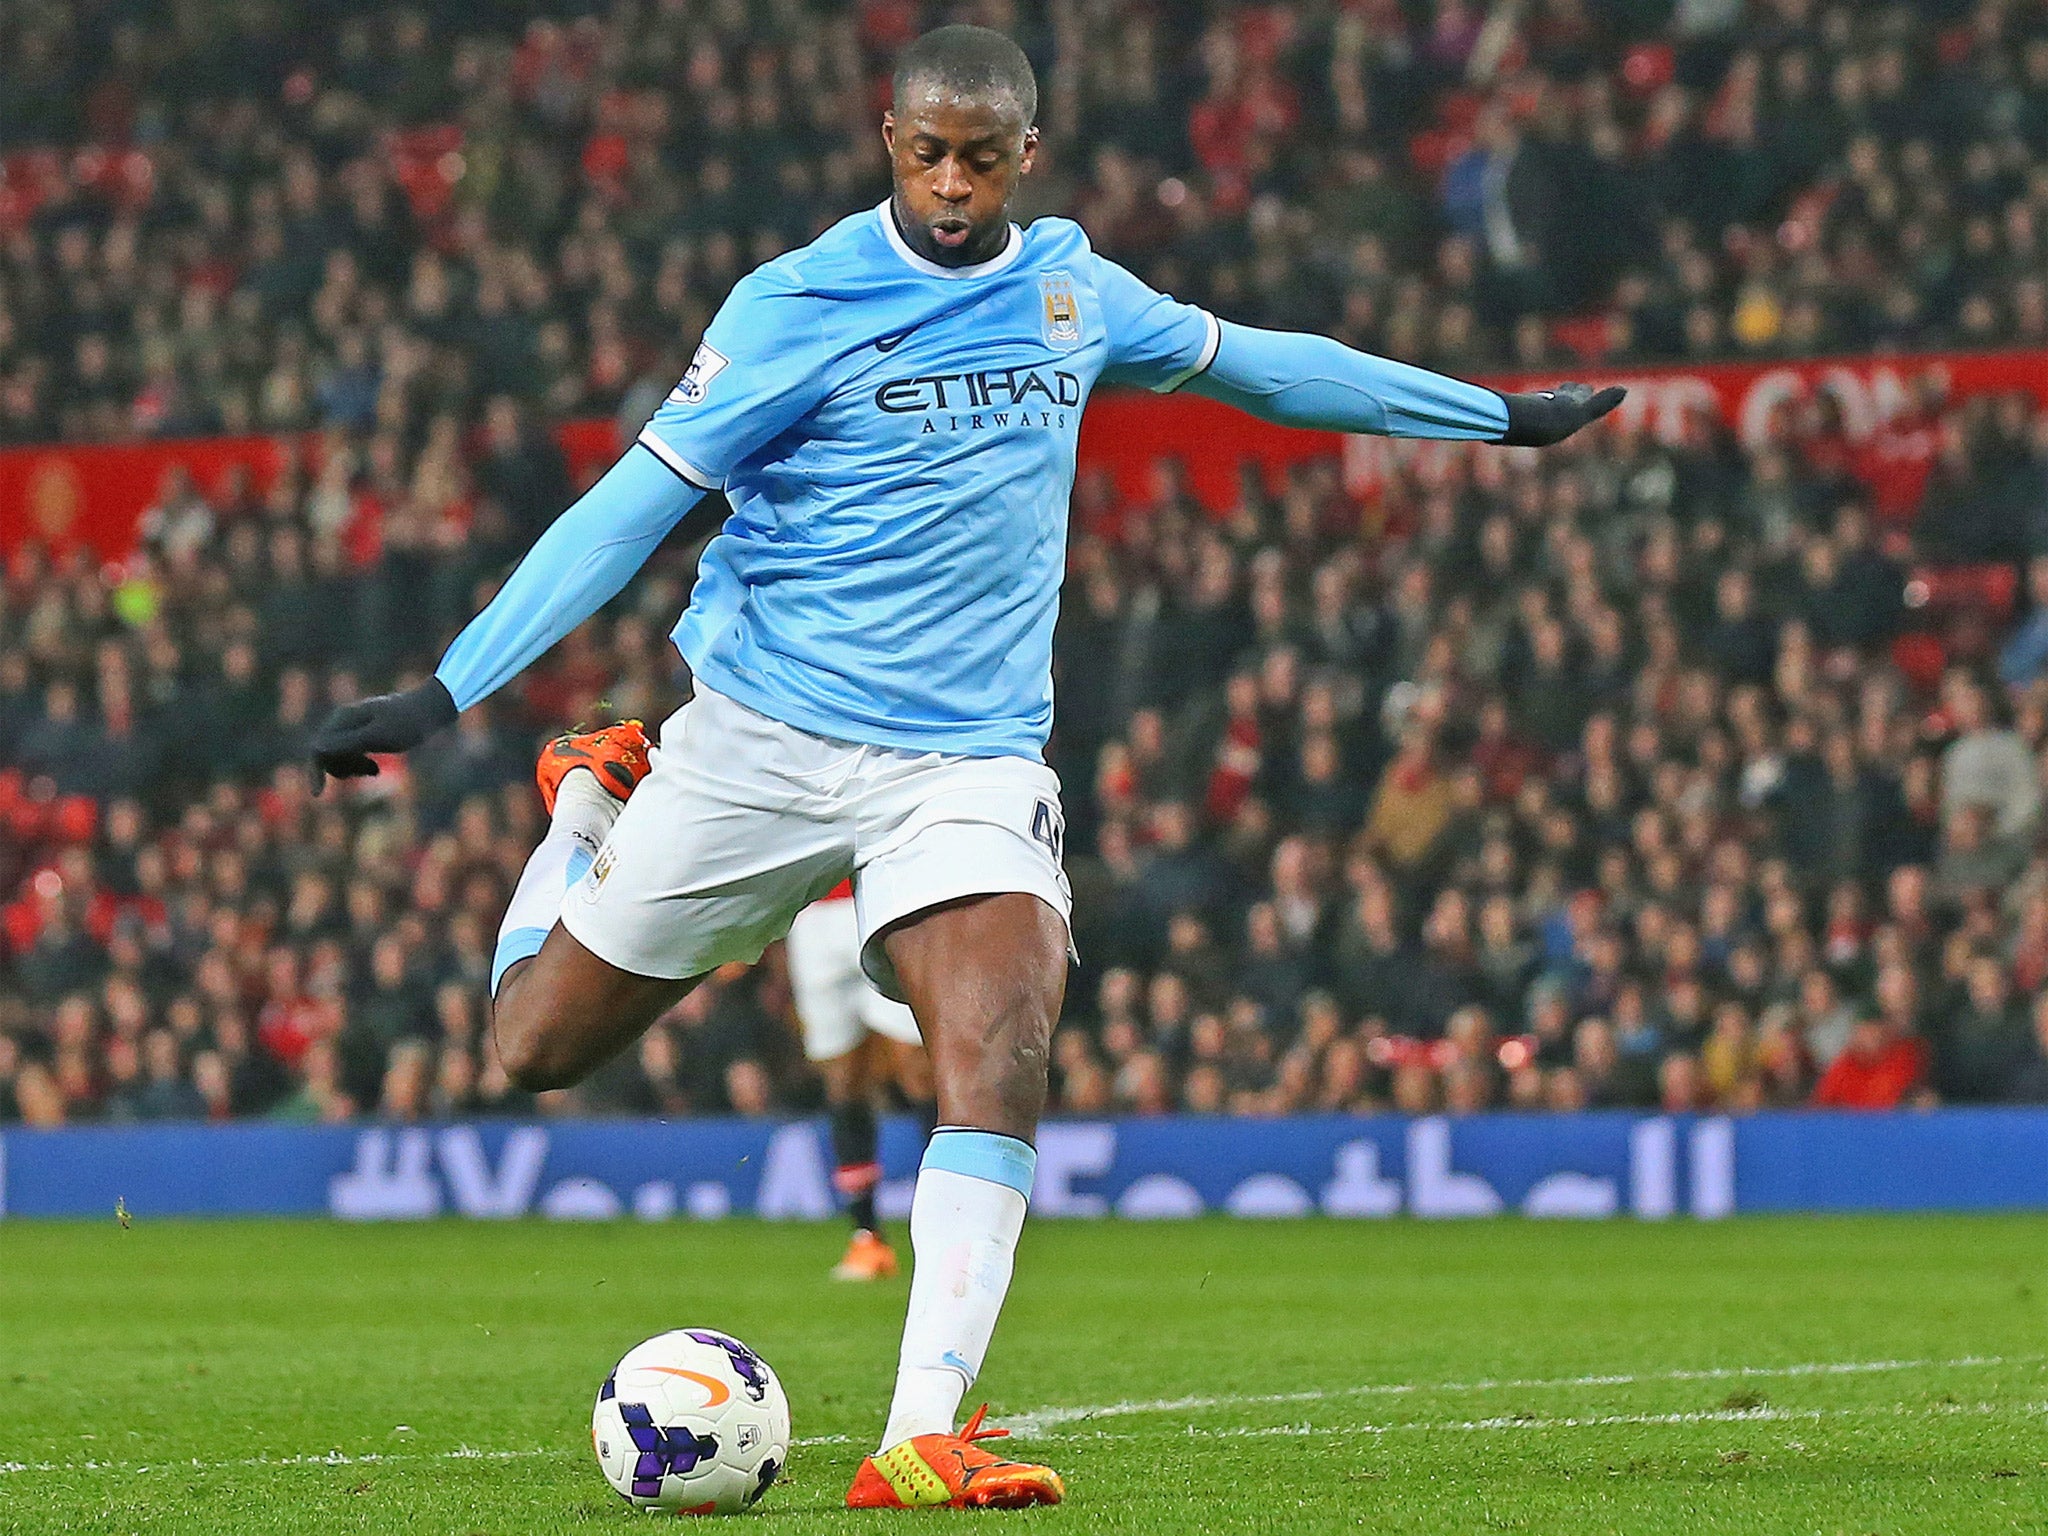 Yaya Toure, pictured scoring against United, is in the form of his life